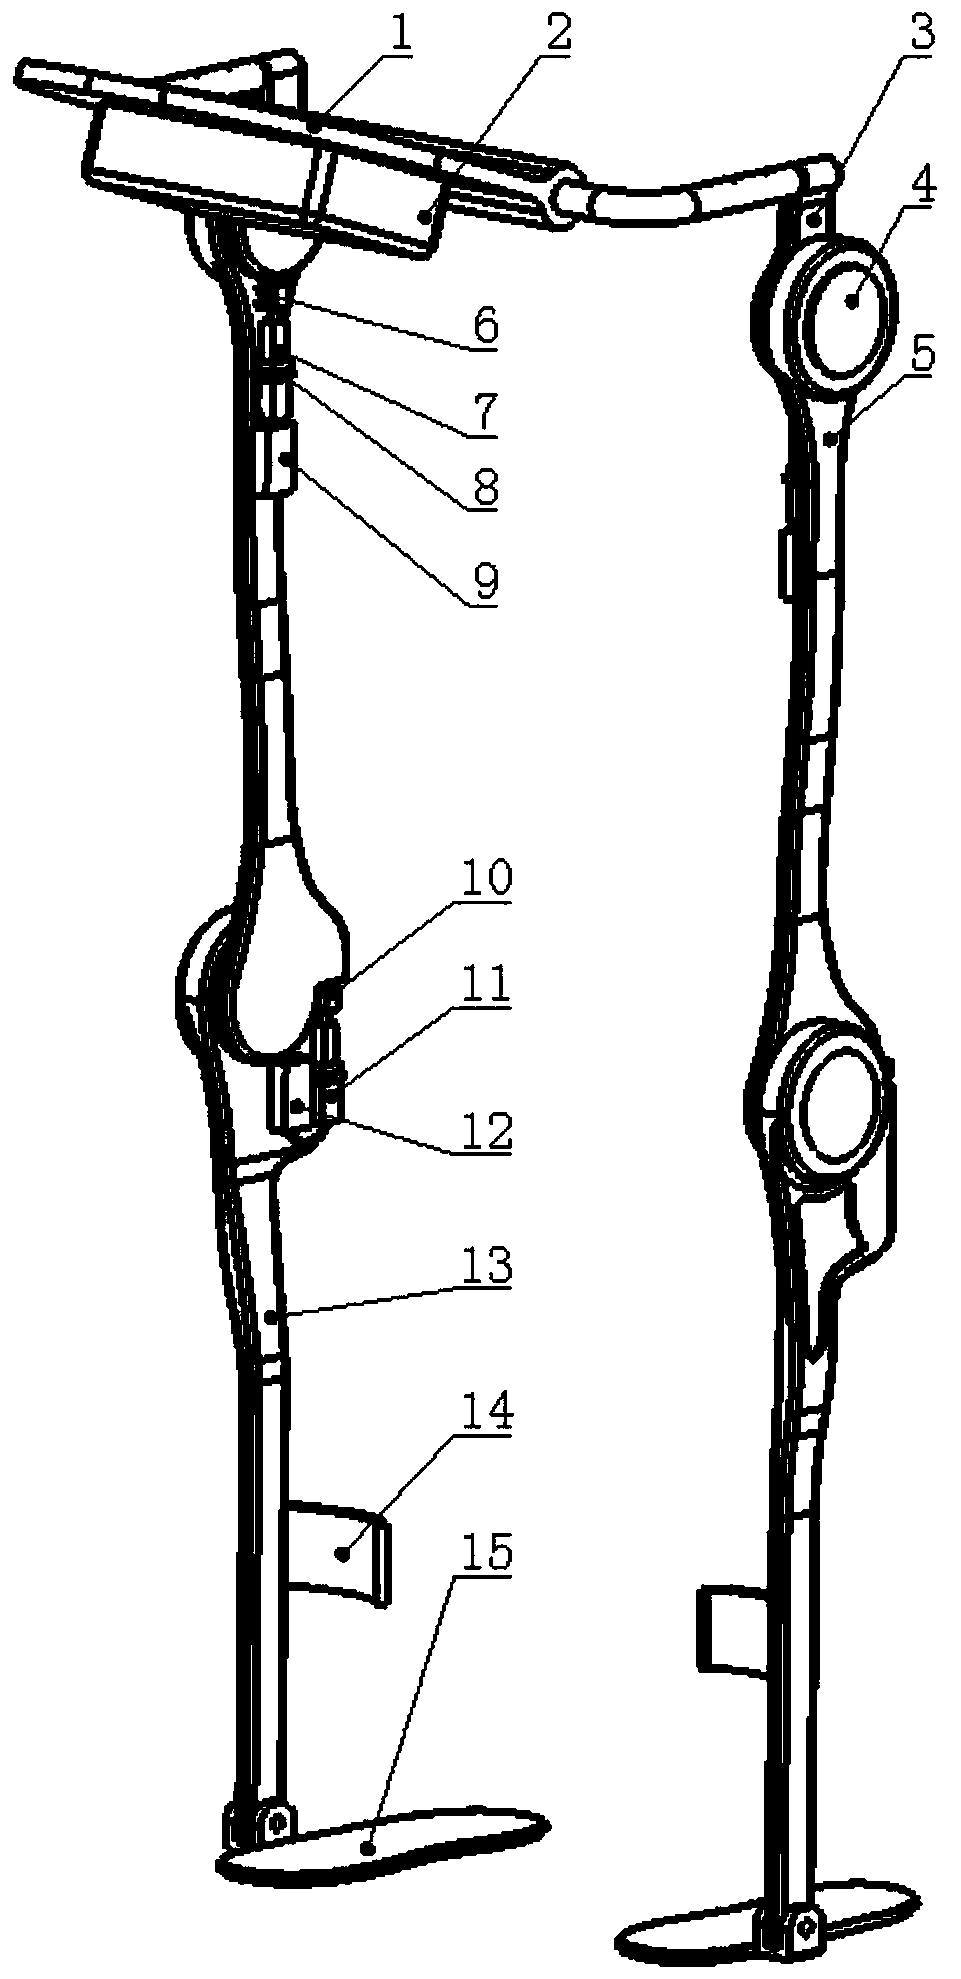 Lower limb load-bearing assisting exoskeleton capable of achieving rapid self-locking in standing state